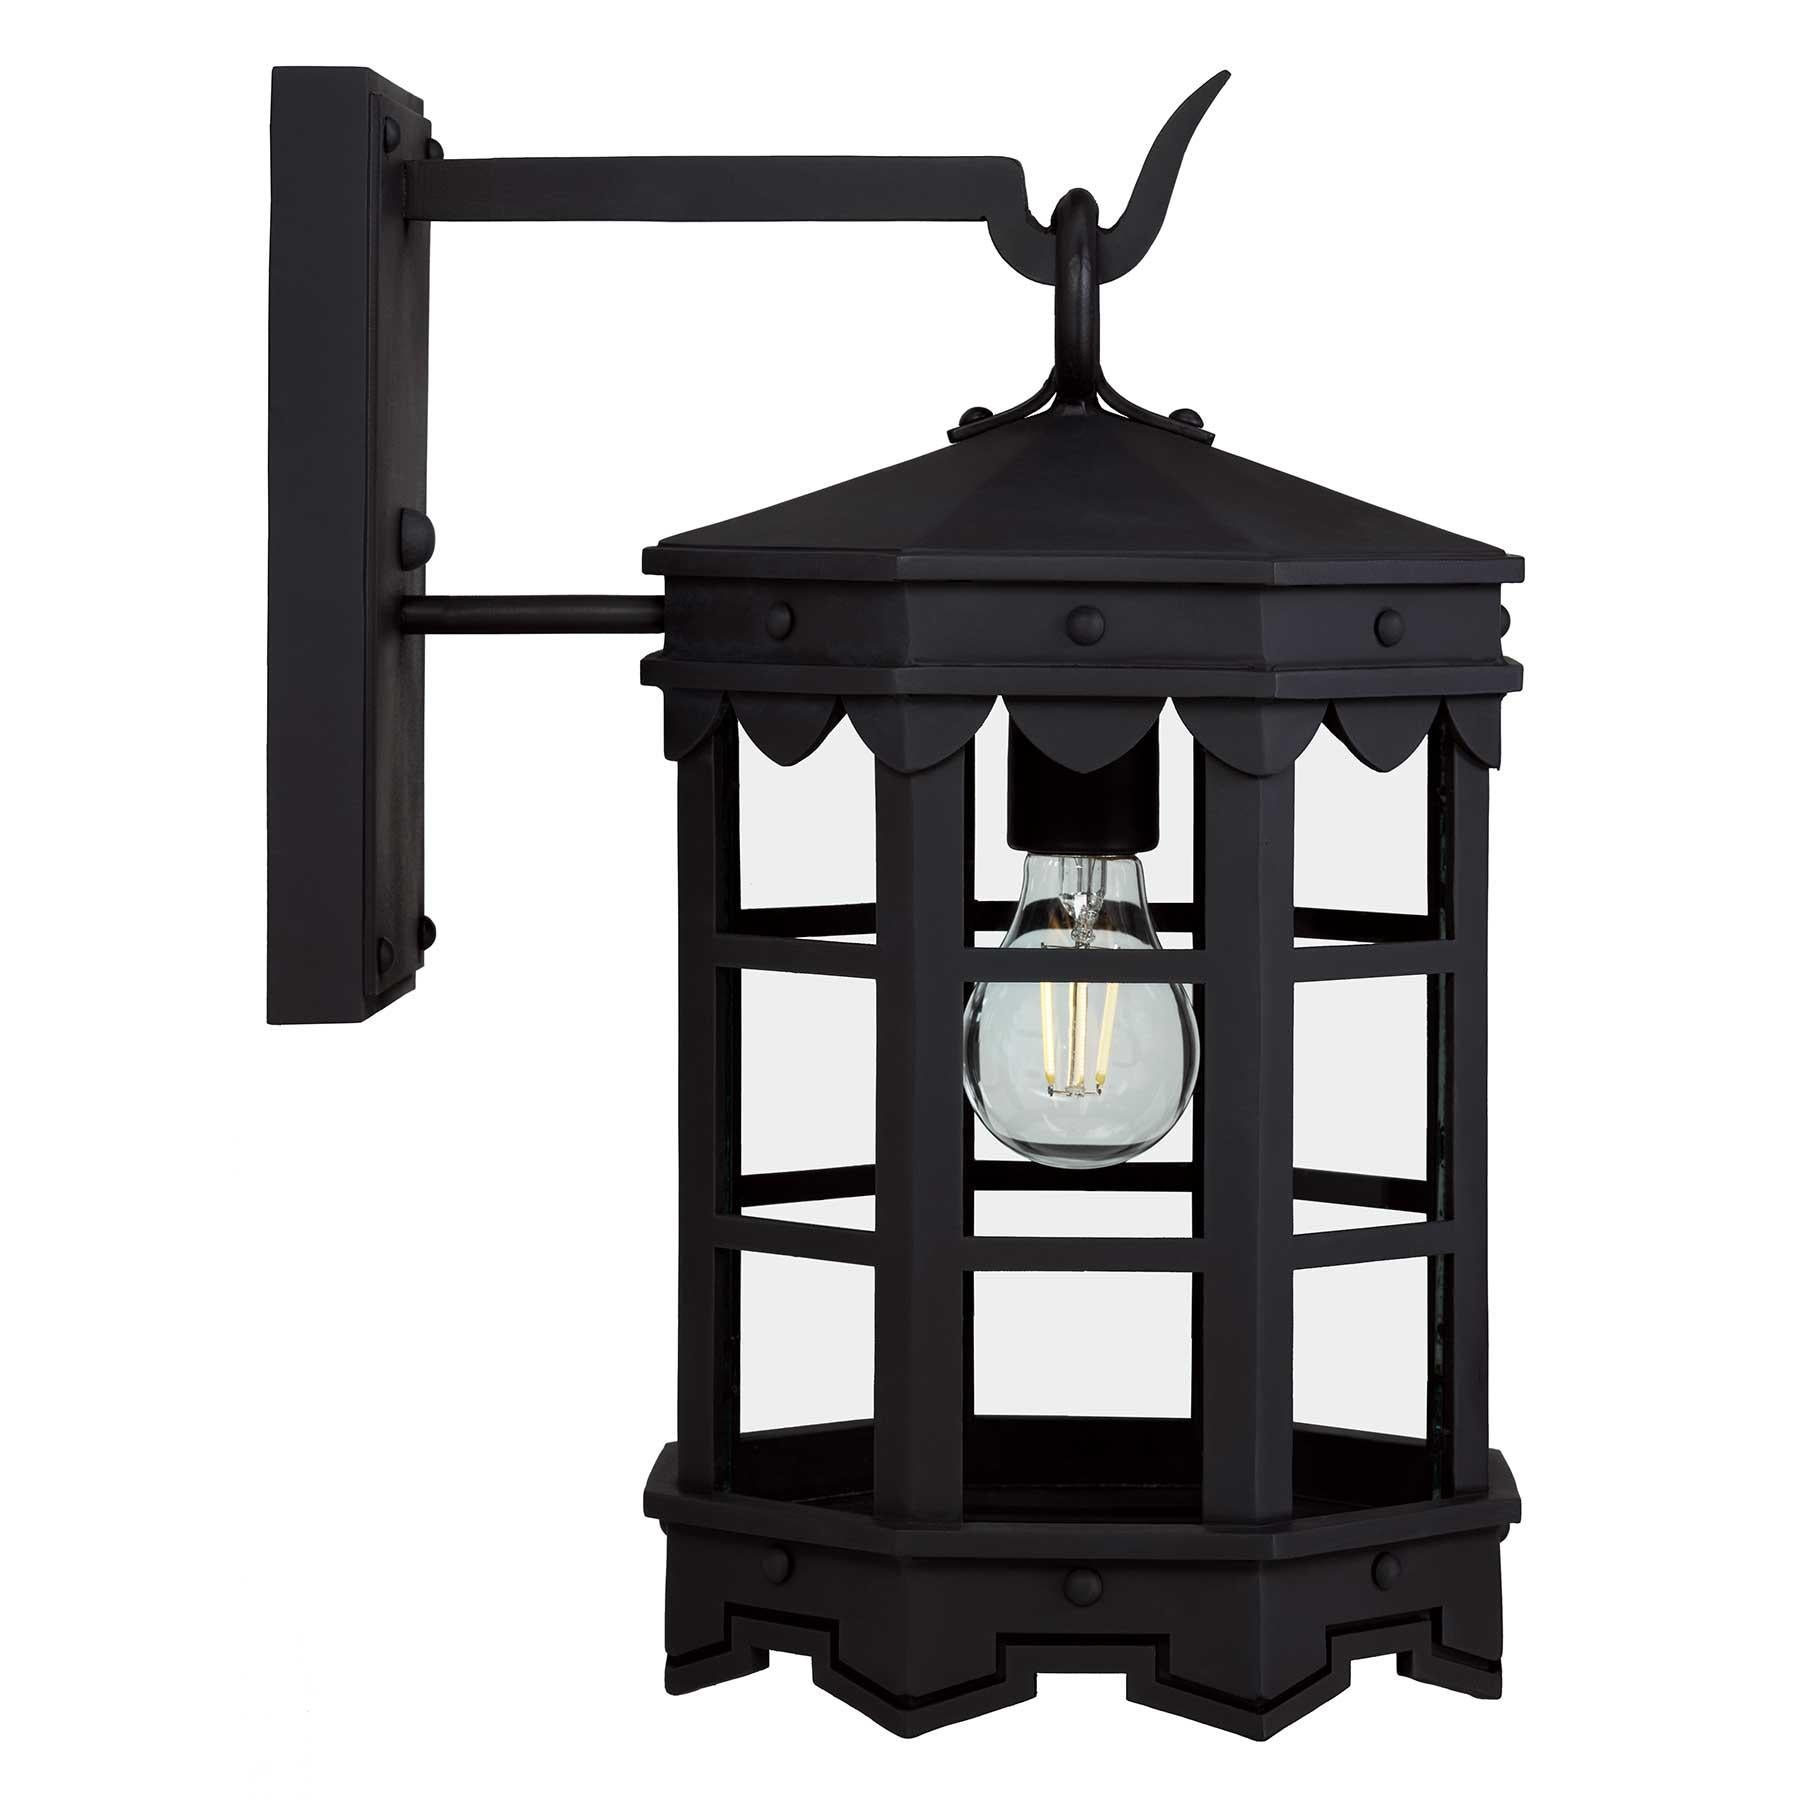 Our De La Guerra light fixture, finished in our SBLC Black Finish, has Mediterranean and Spanish Colonial style precedence with historic profiles and contemporary geometric lines. This fixture is a stunning blend of Old World elegance and